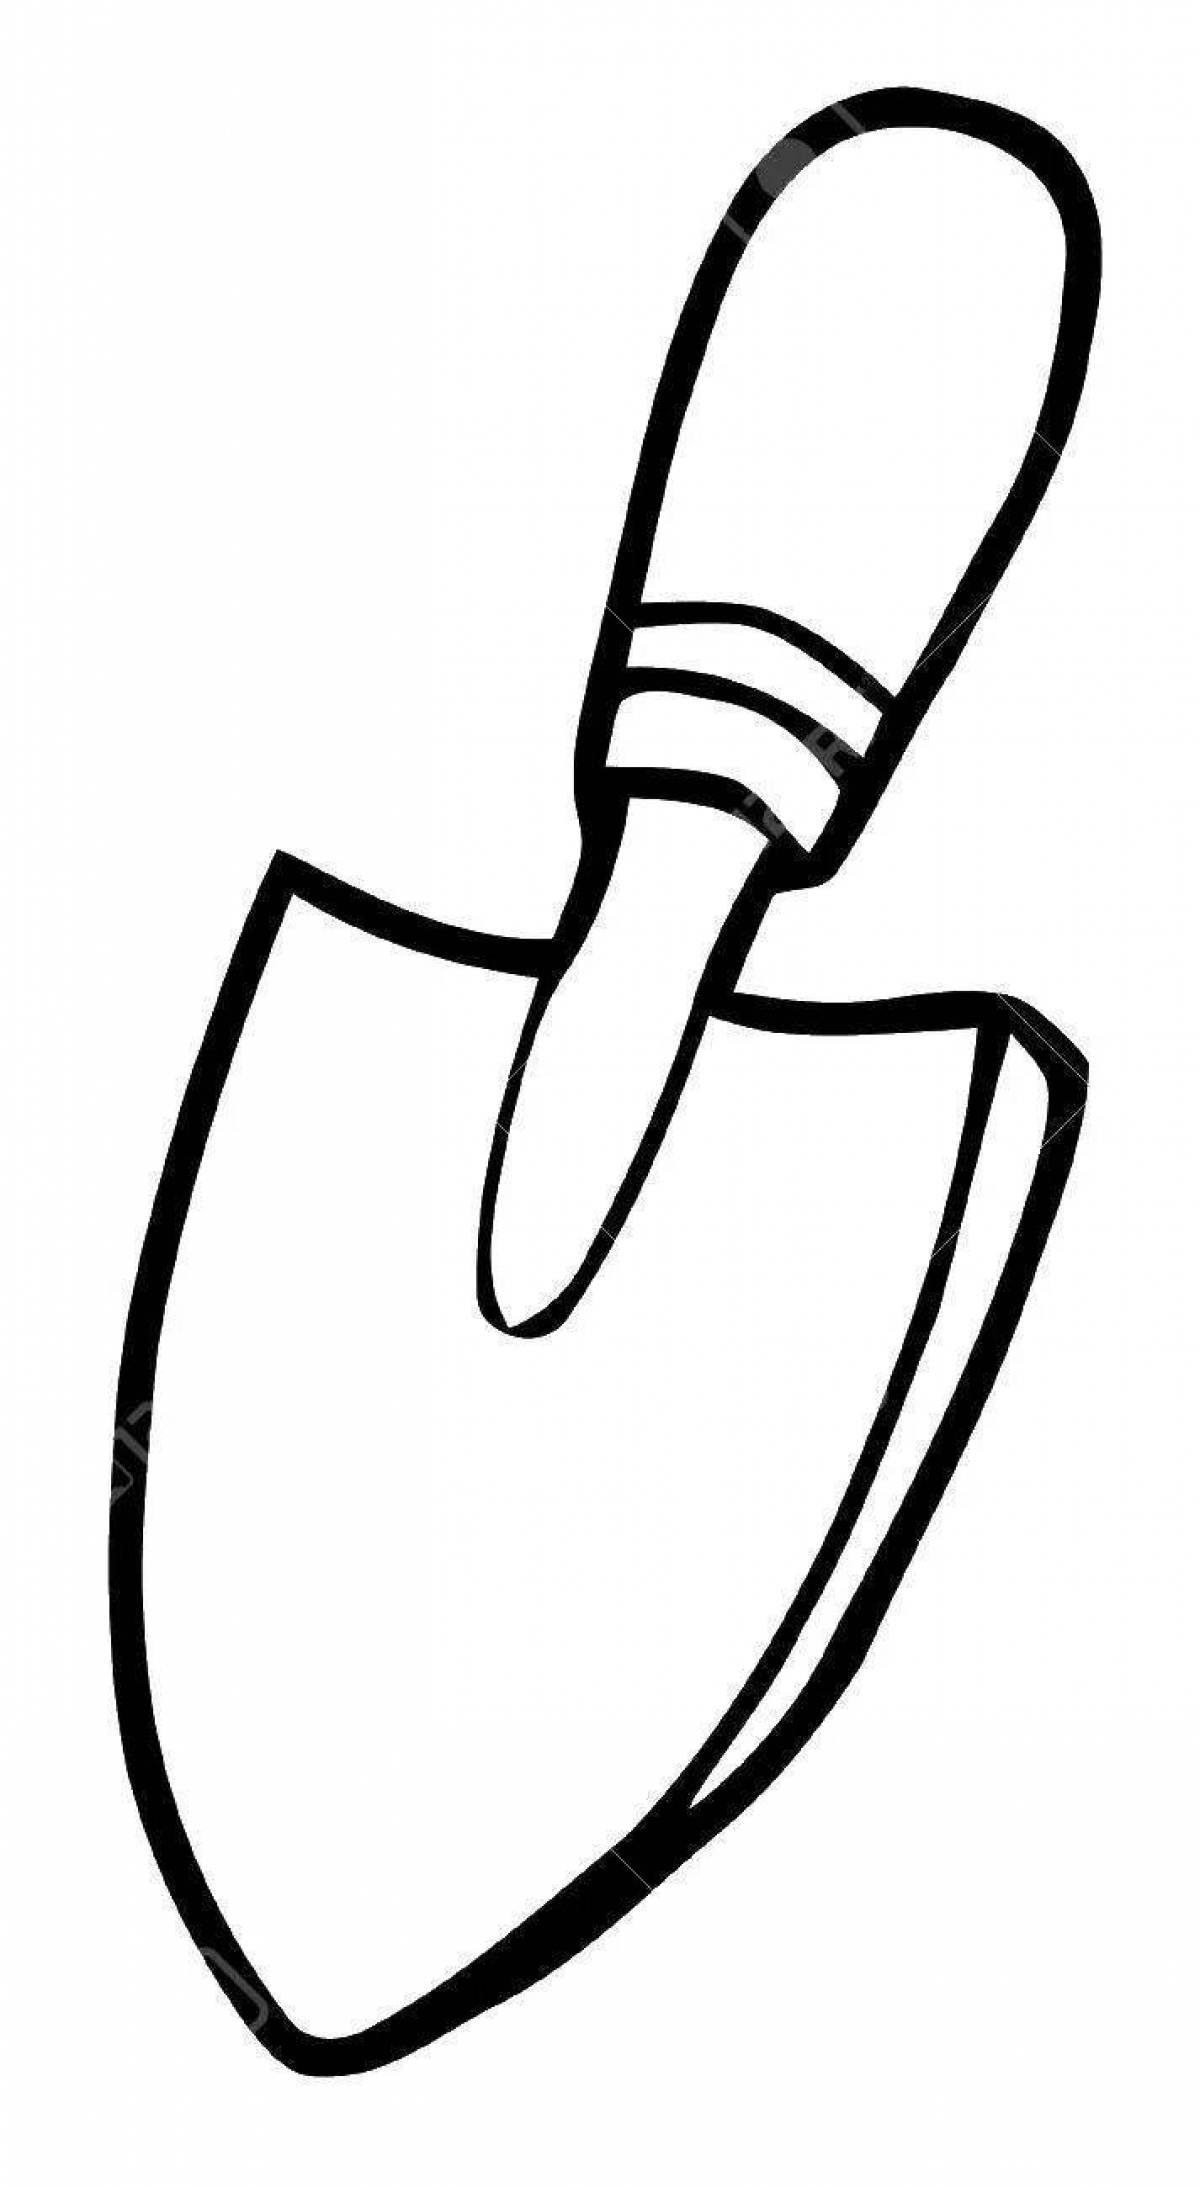 Awesome spatula coloring page